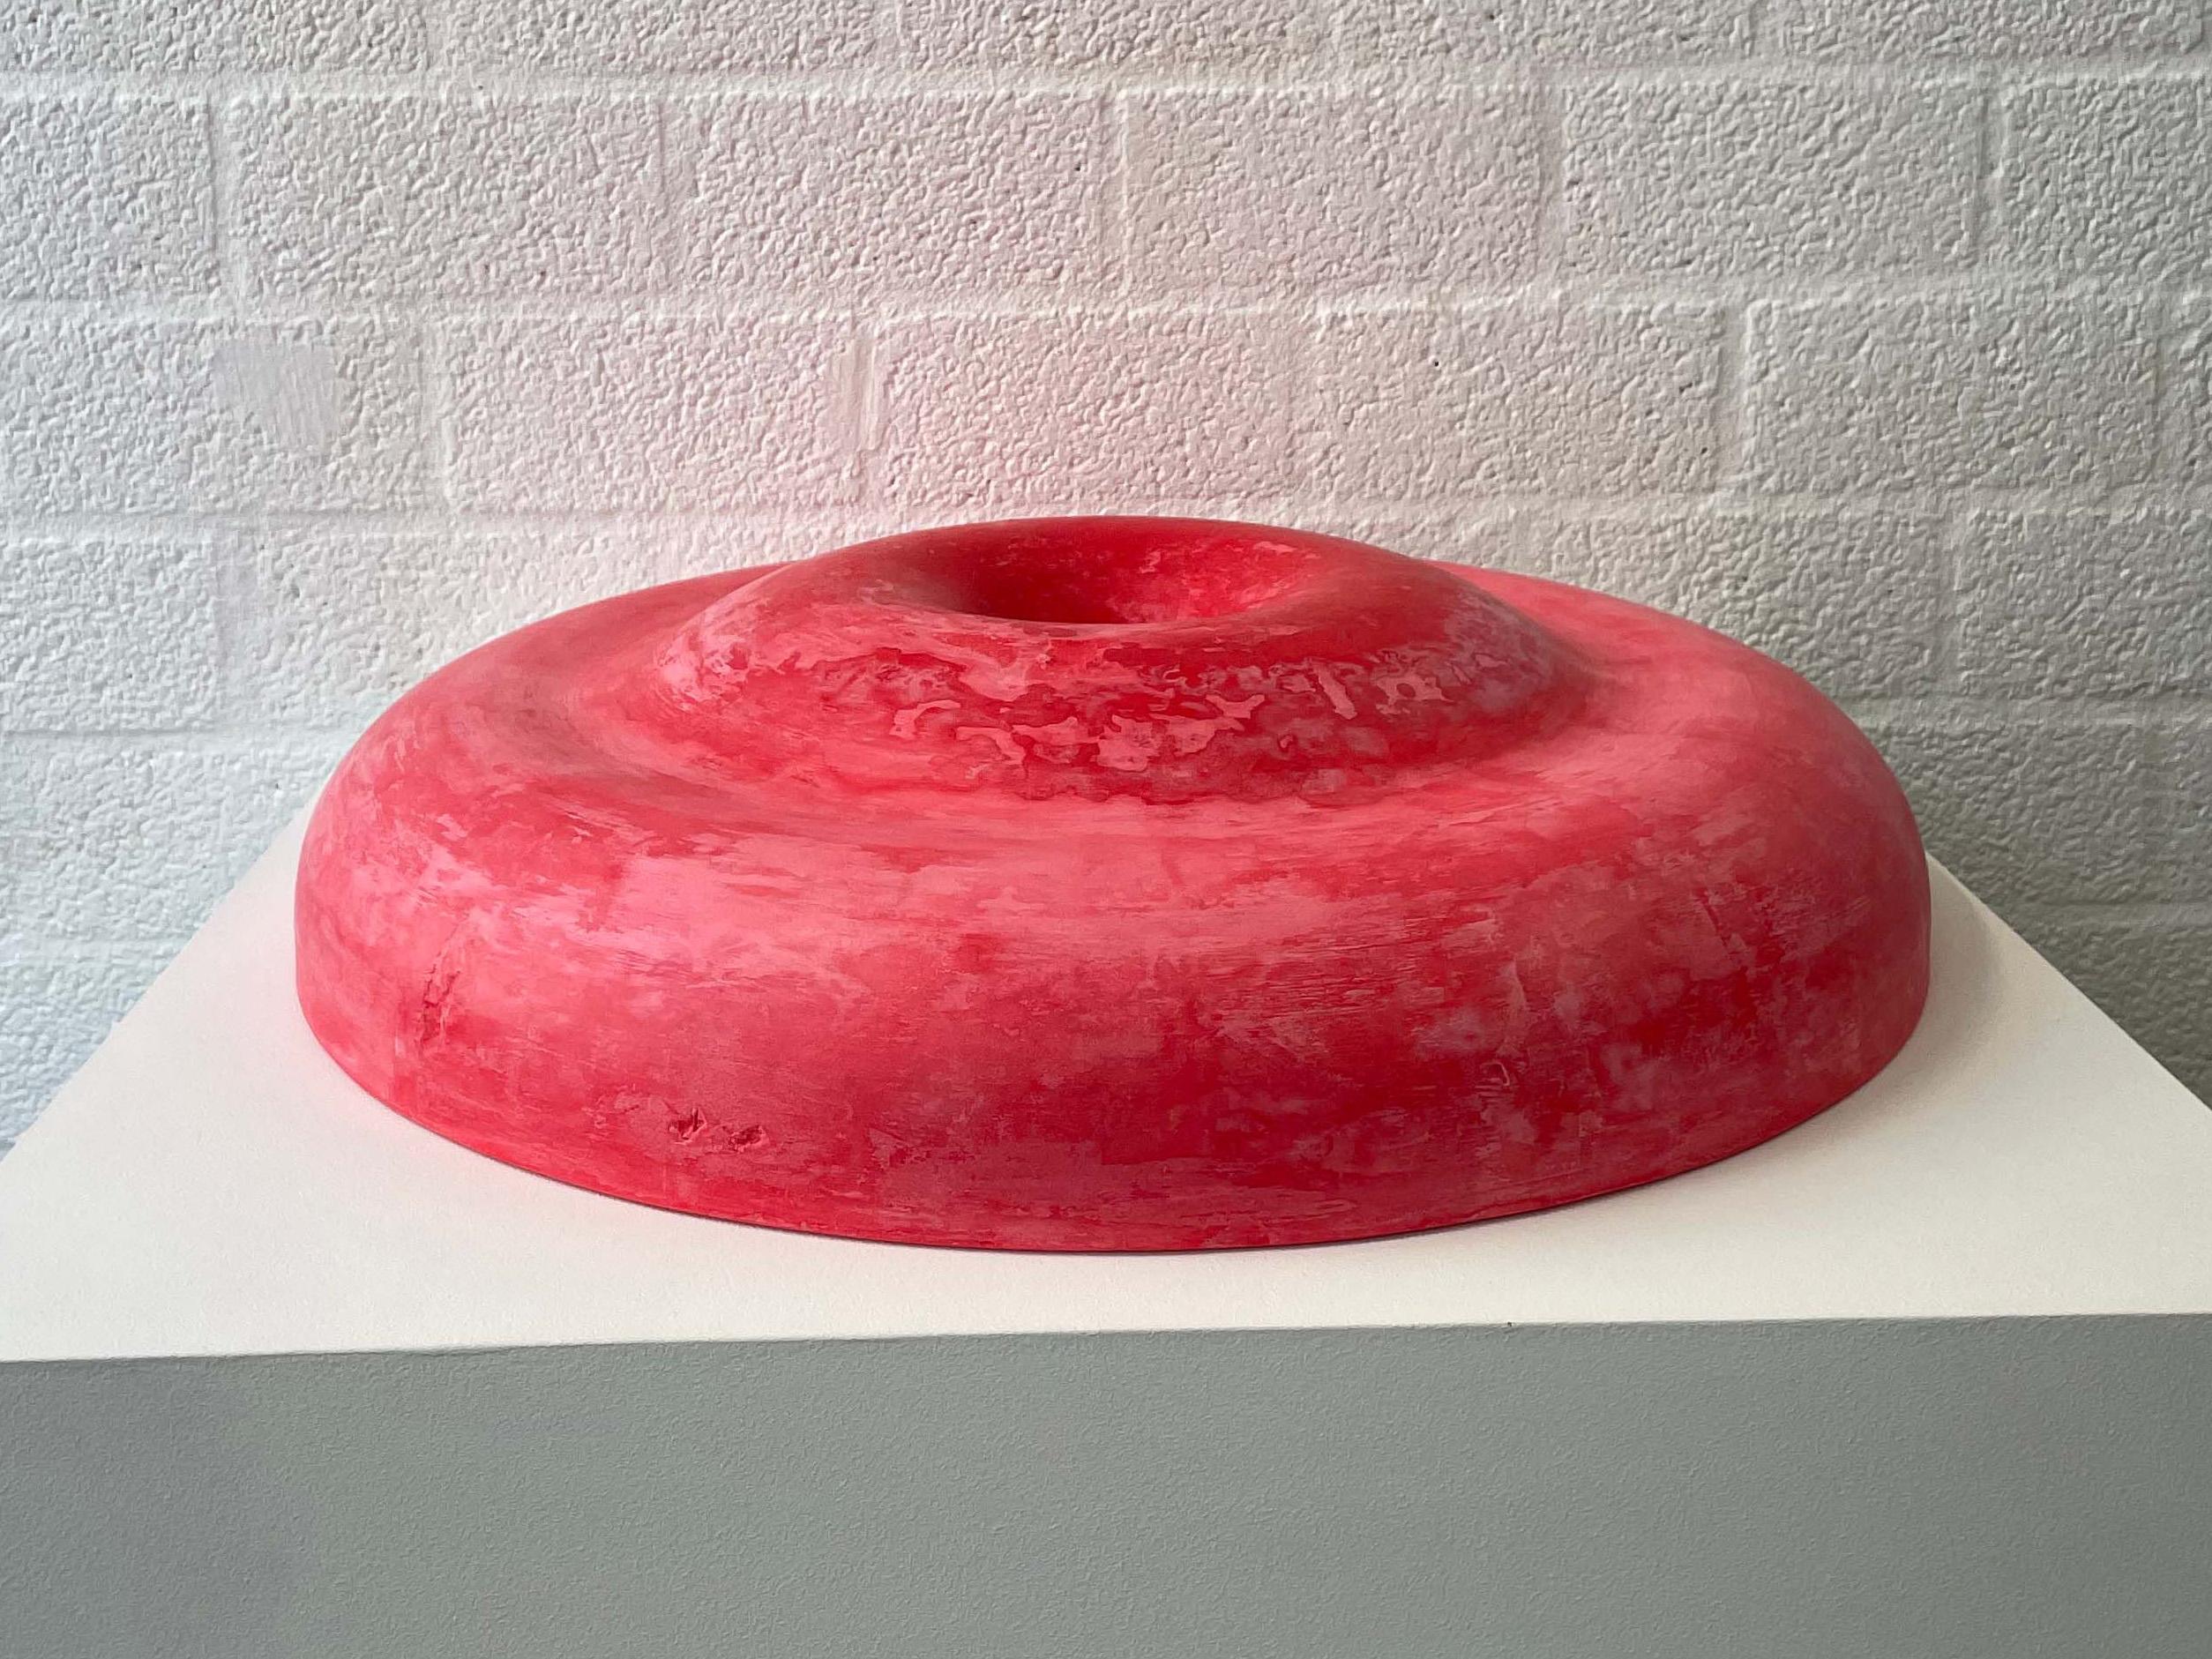 Twirl Bowl, Deep Red

Production: Made to order, Other designs can be made on request.

Material: Alpha crystalline gypsum (Hard plaster)
Finish: Glossy coating
Inside Finish: Glossy coating

Twirl Bowls is a Collection of sculptural bowls made by